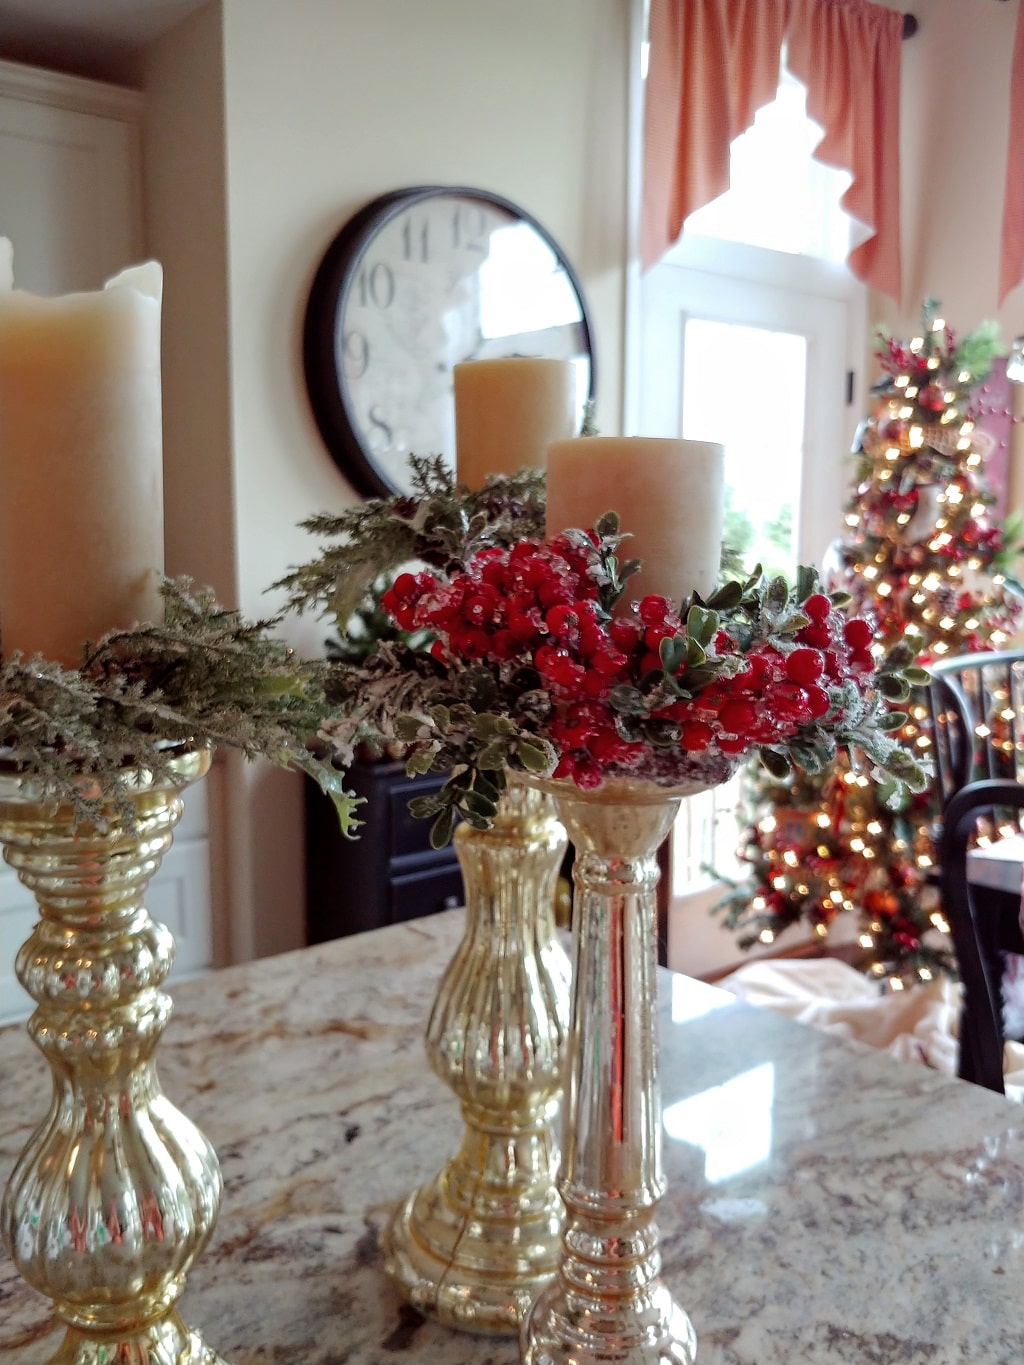 6 Ways to Get Ready for Christmas